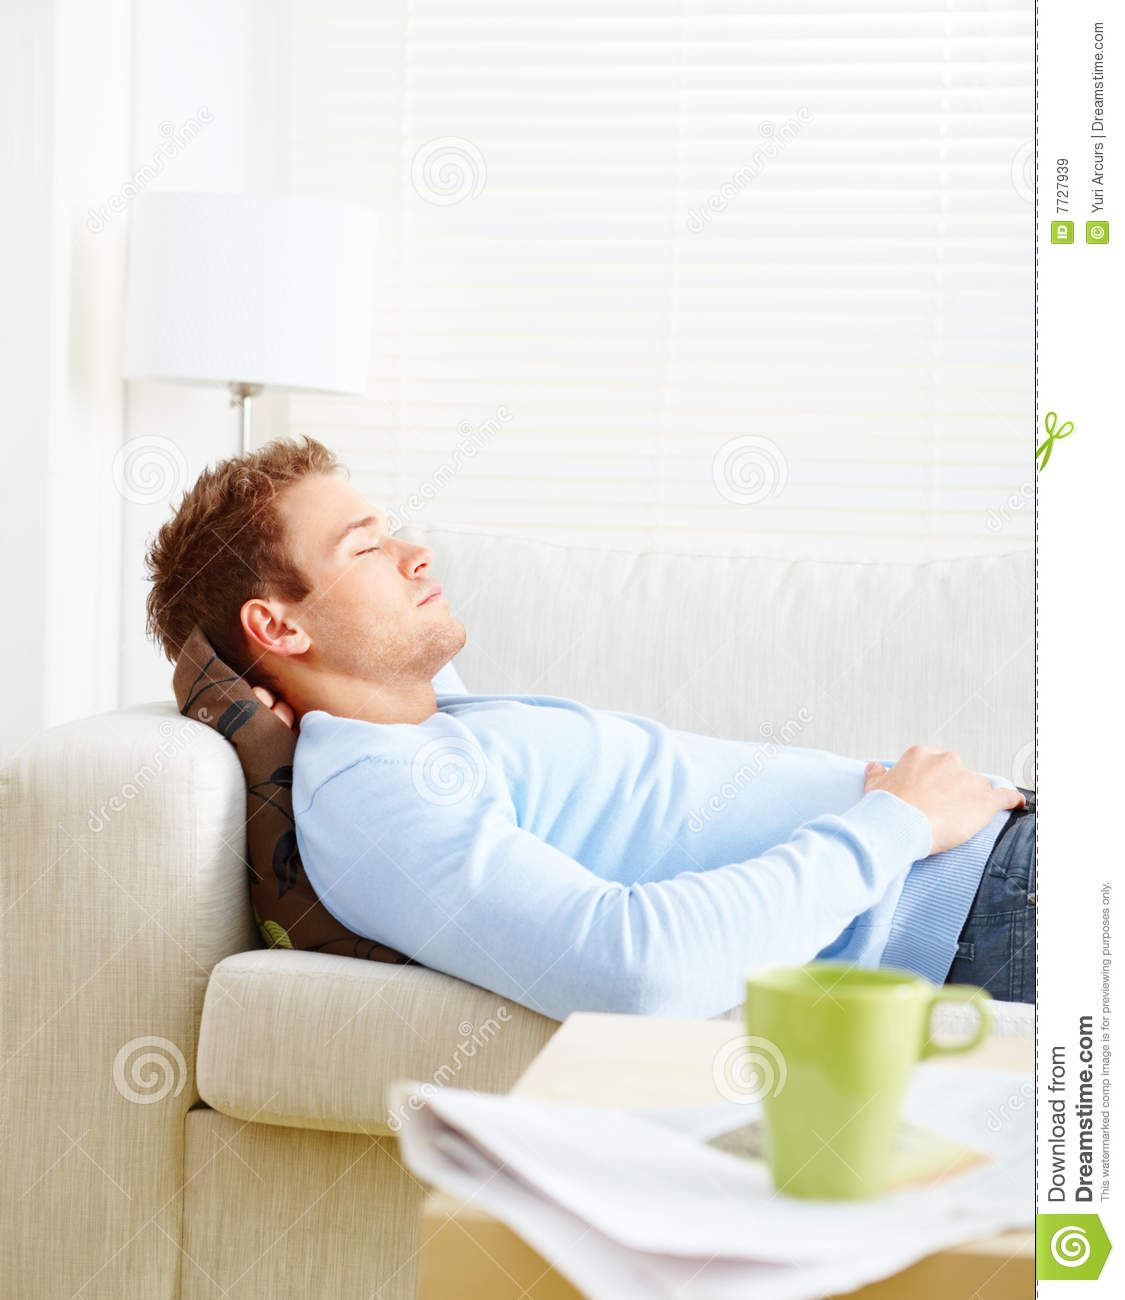 Stock Images  A Man Asleep On The Living Room Couch  Image  7727939